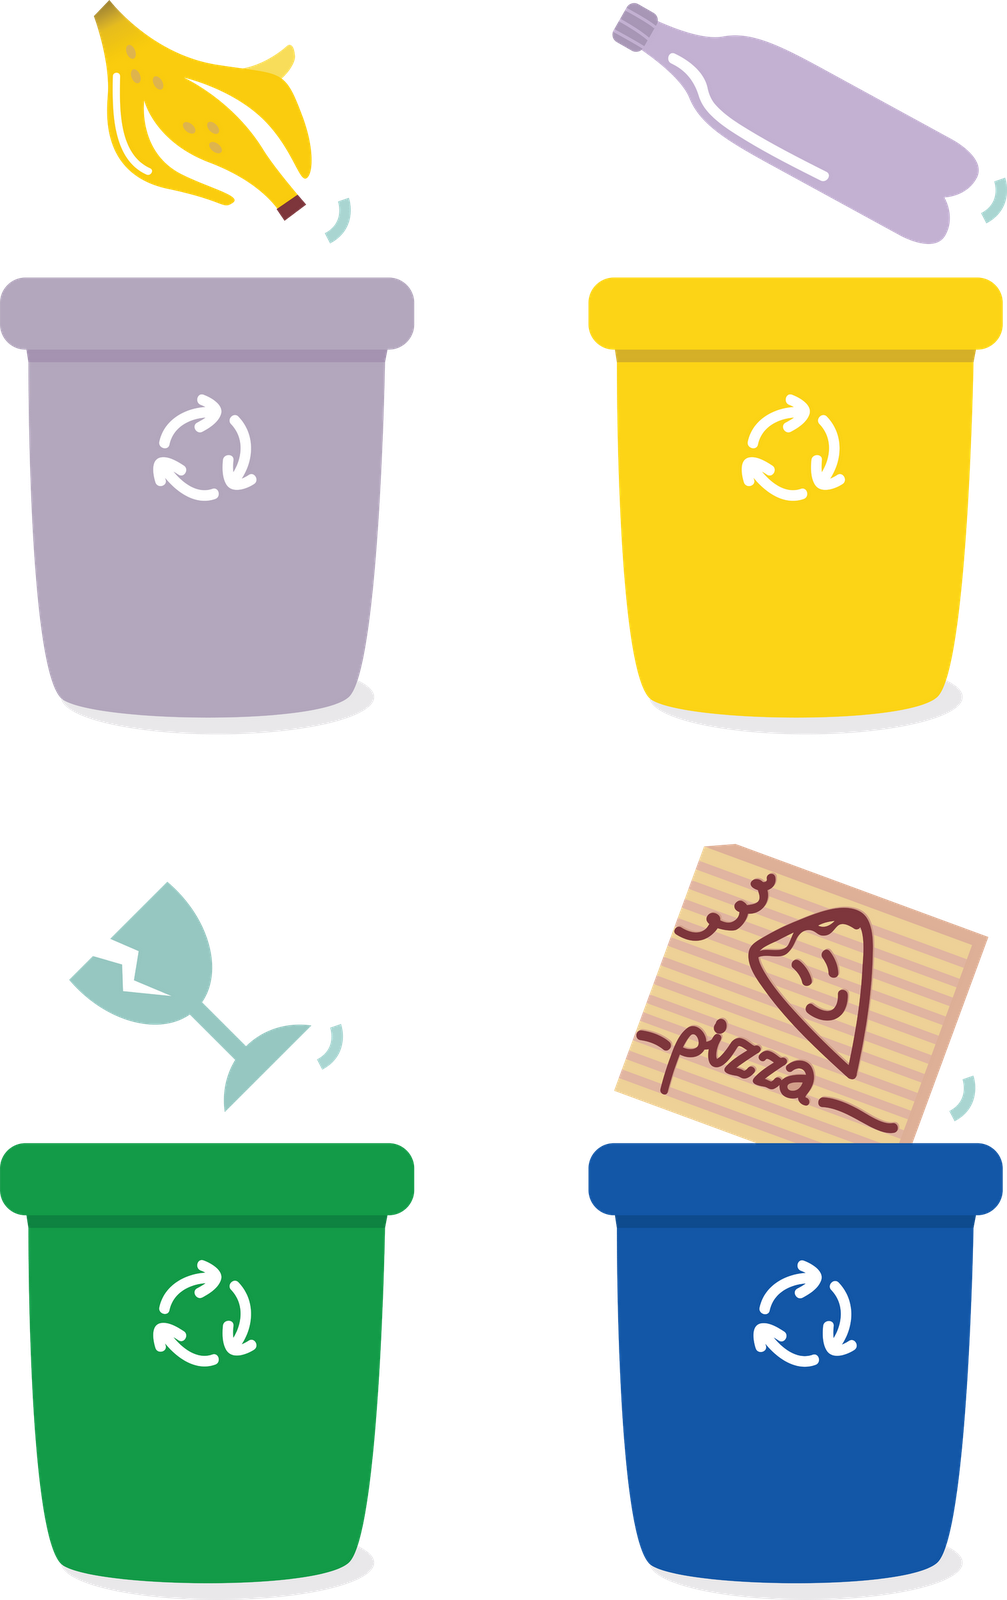 Bin Sorting Recycling Baskets Paper Rubbish Recycle PNG Image